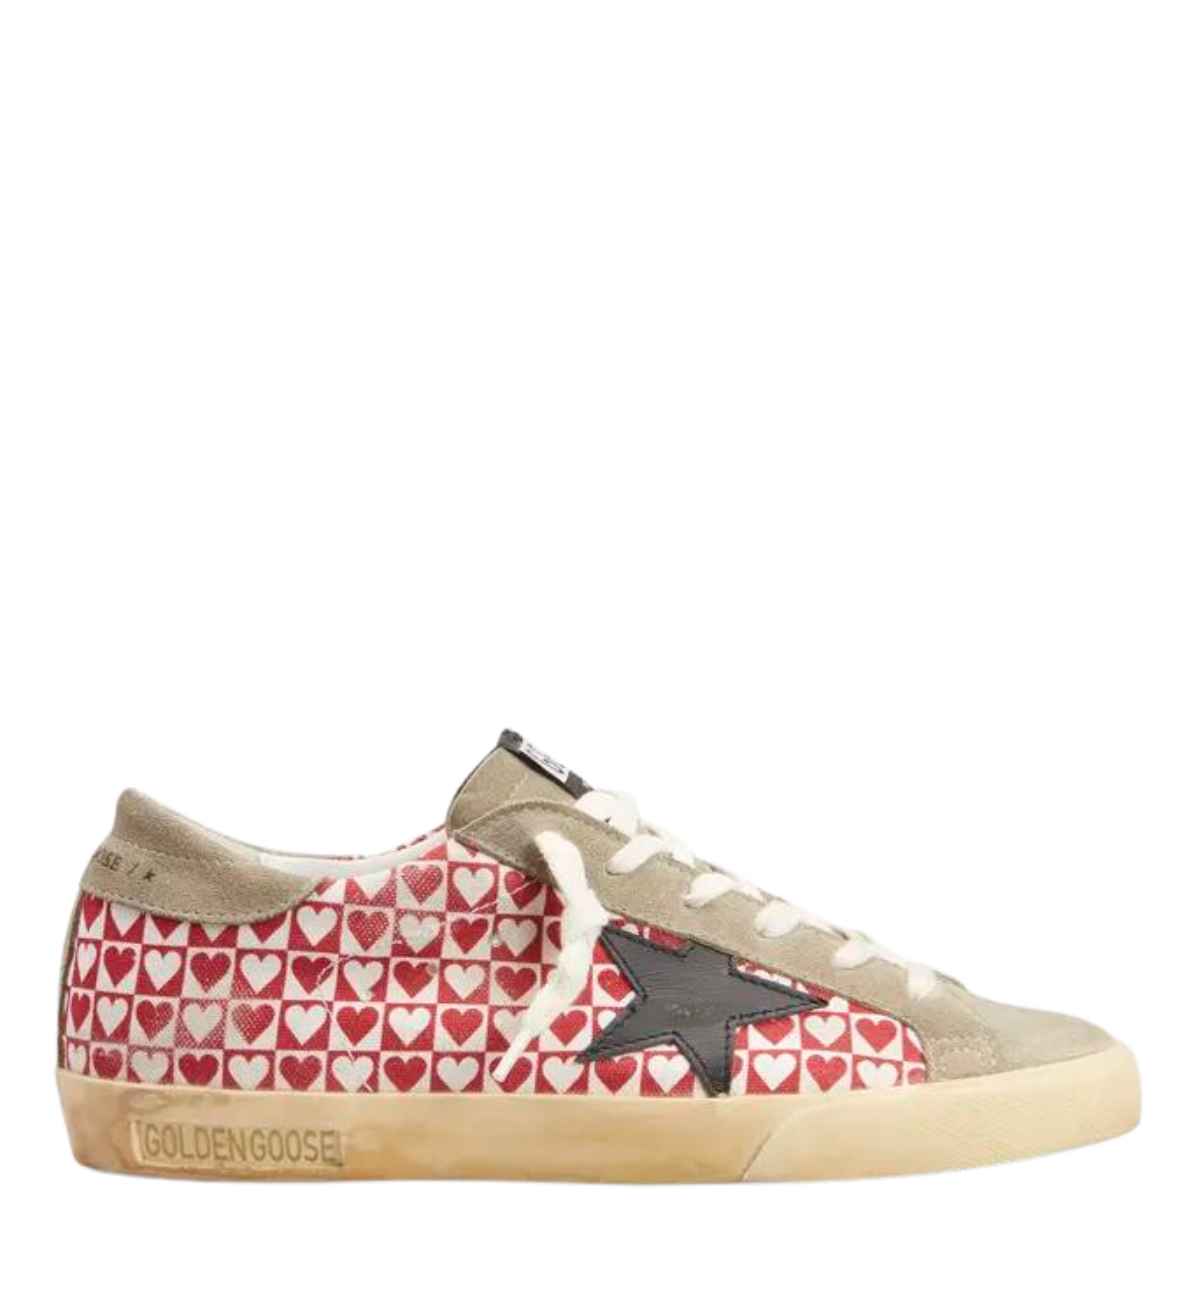 Golden goose heart sneaker with red and white checkered heart pattern all over on white background.